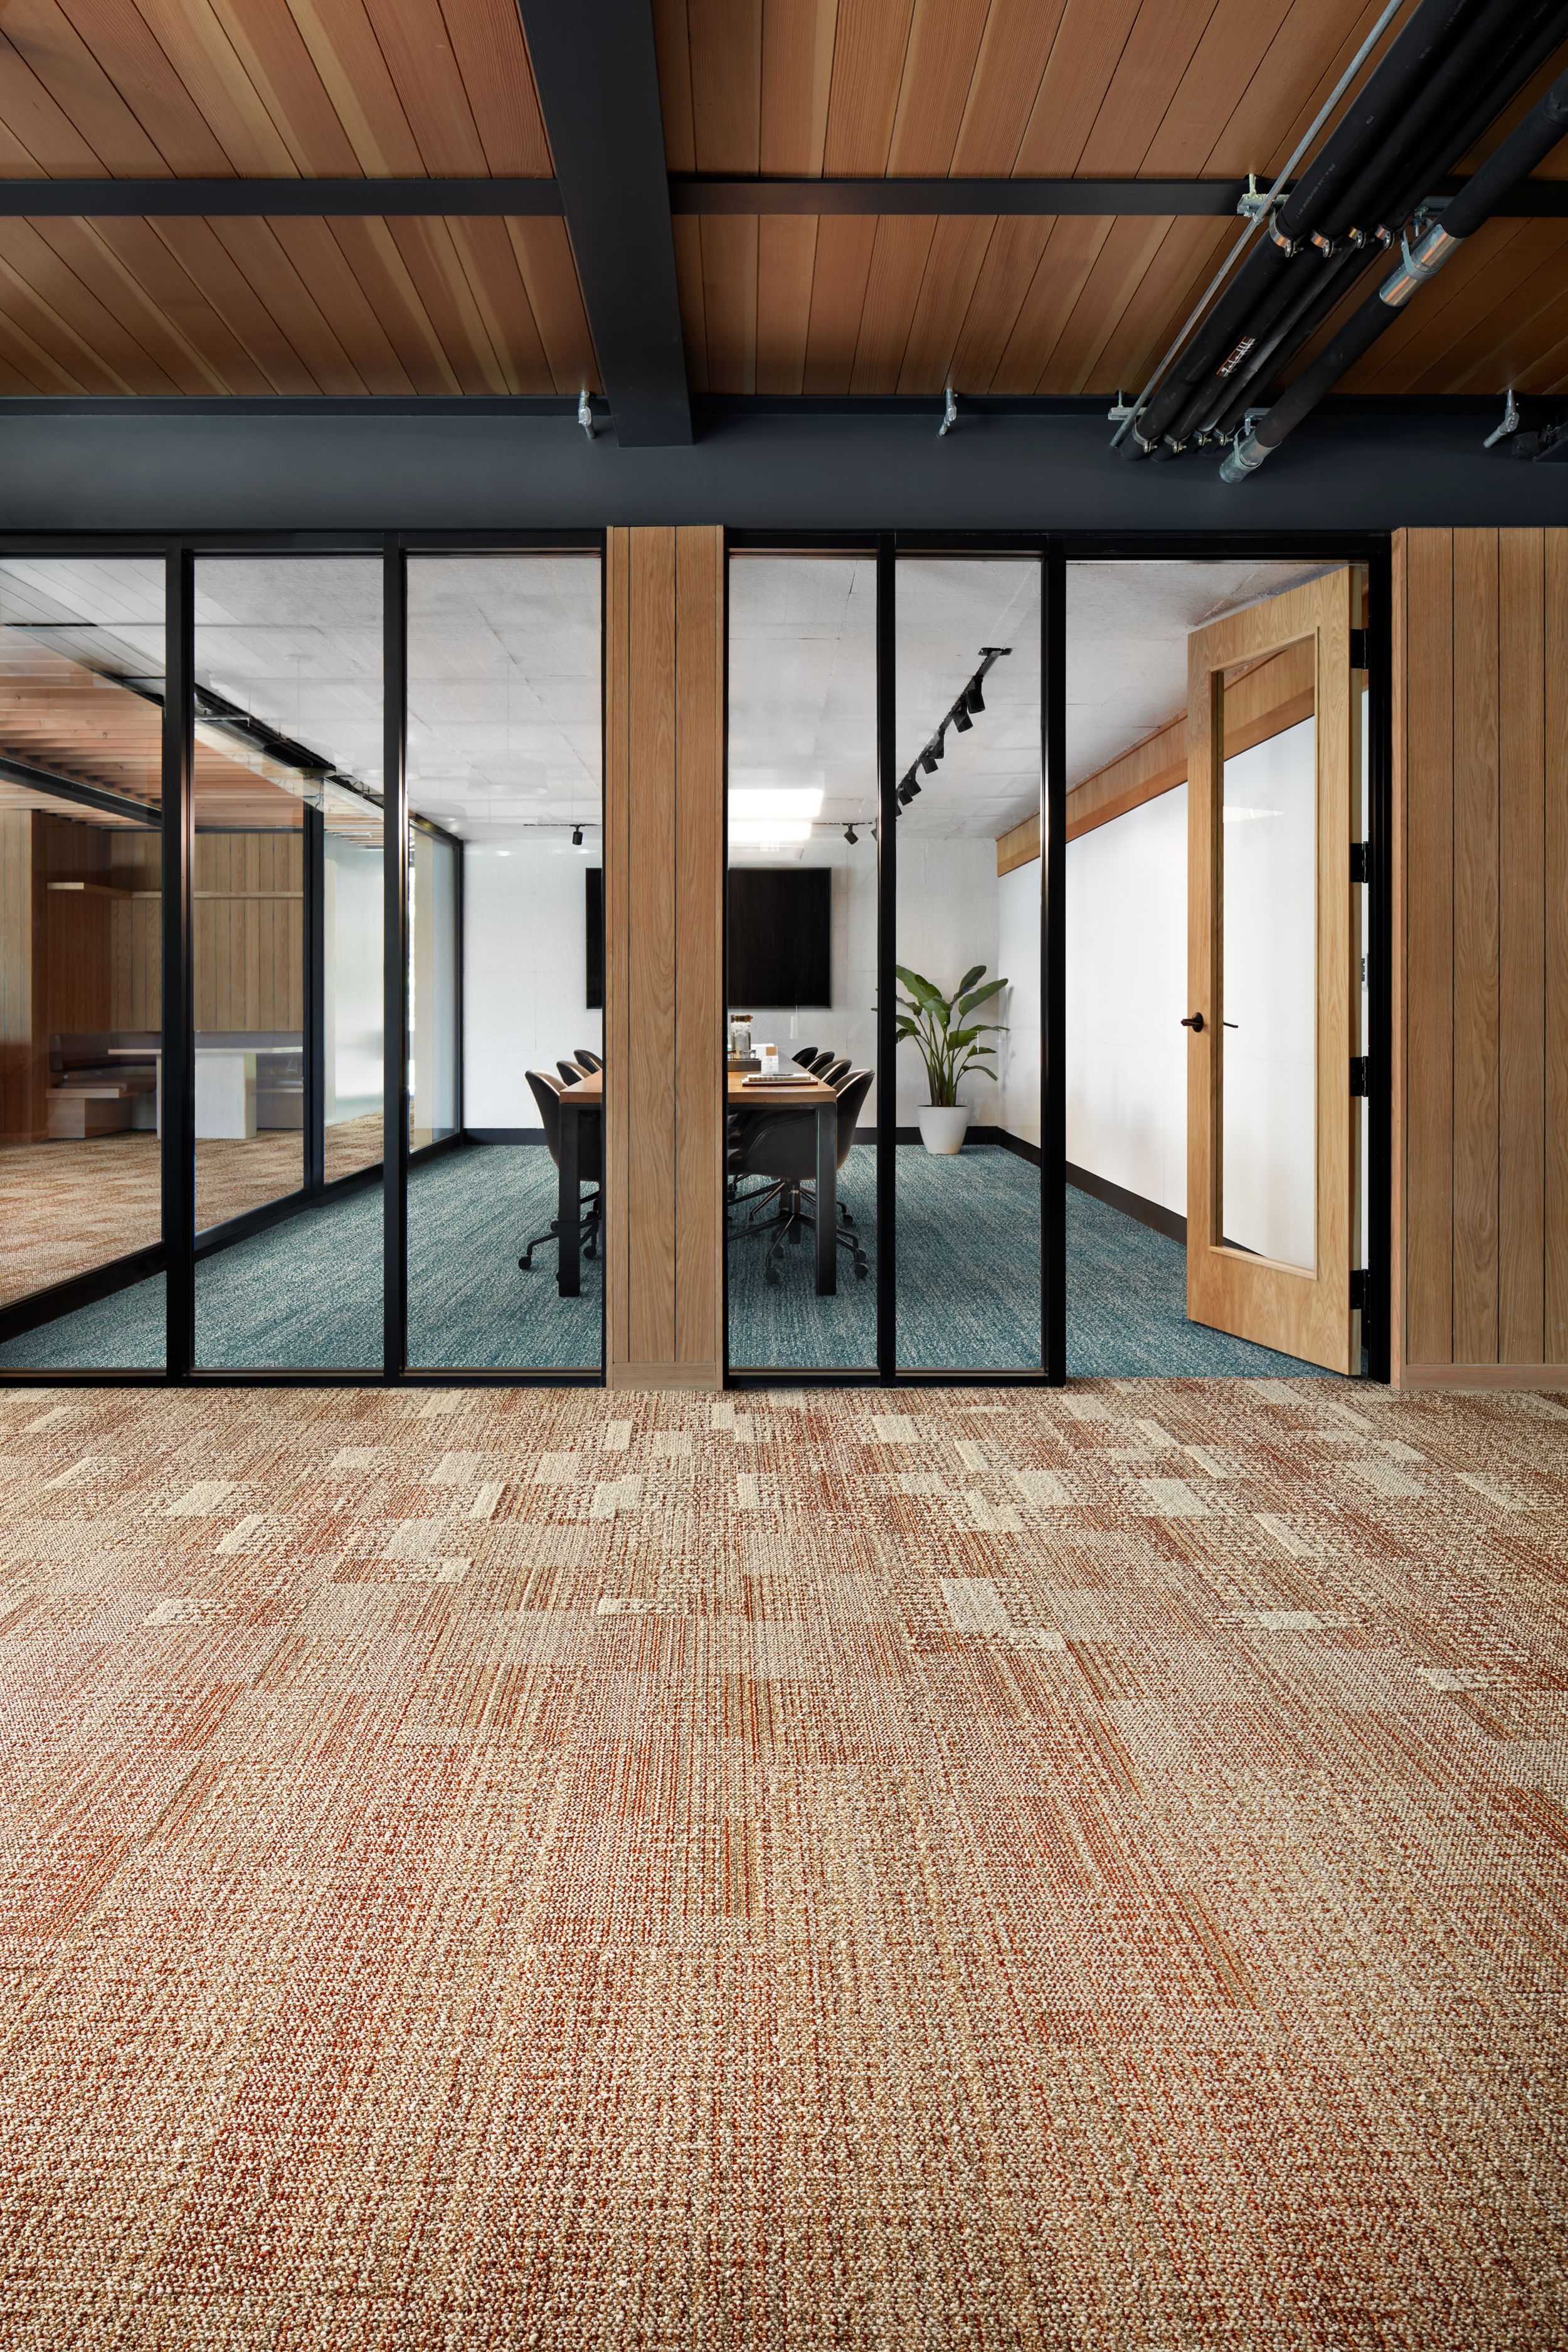 Interface Dot 2 Dot, Dot O-Mine and Diddley Dot plank carpet tile in meeting room image number 3